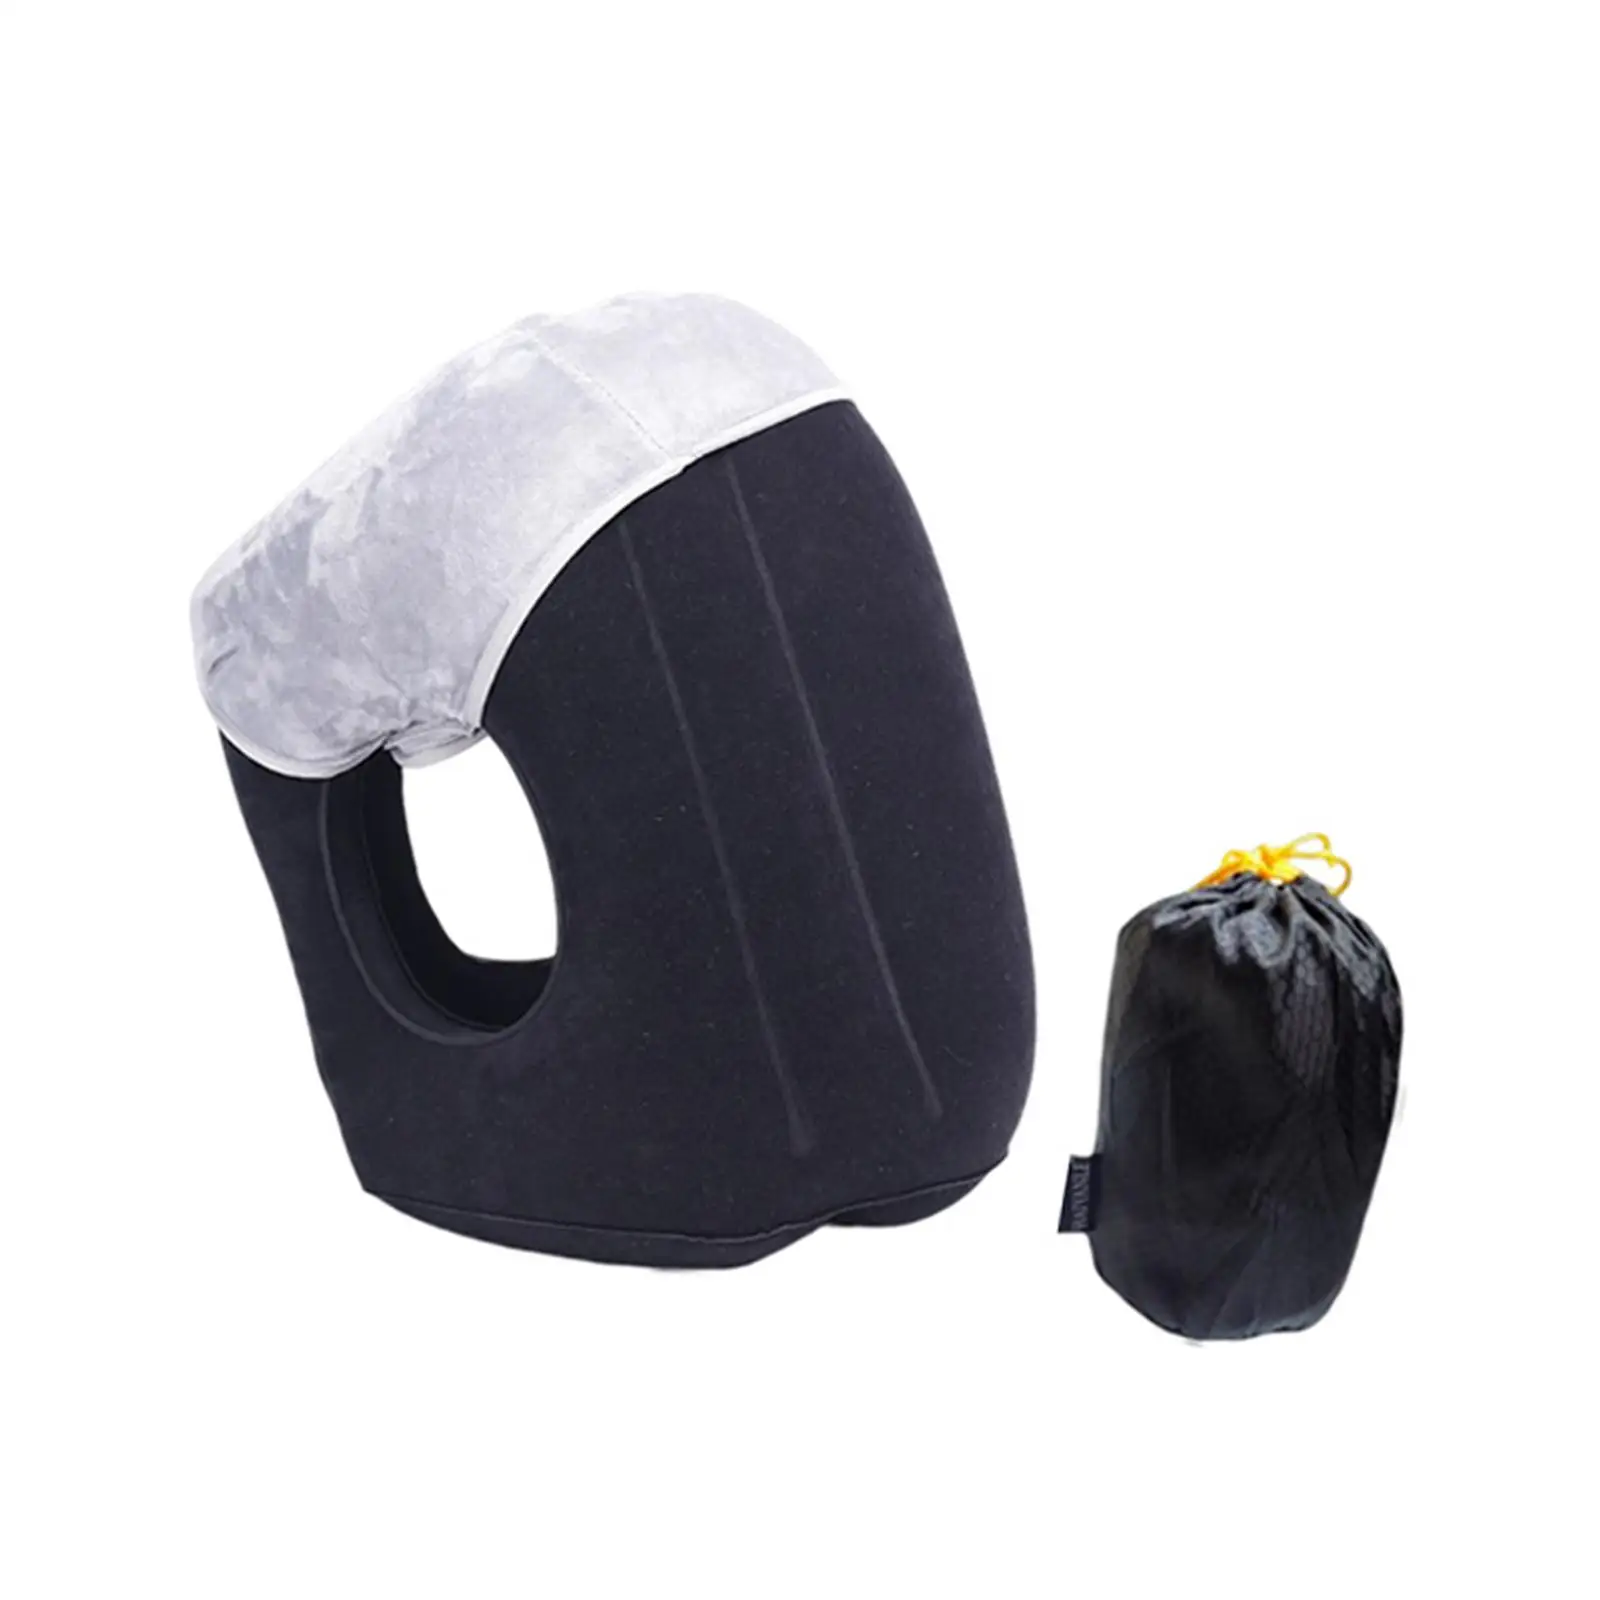 Folding Inflatable Air Pillow with Drawstring Bag for Bus Office